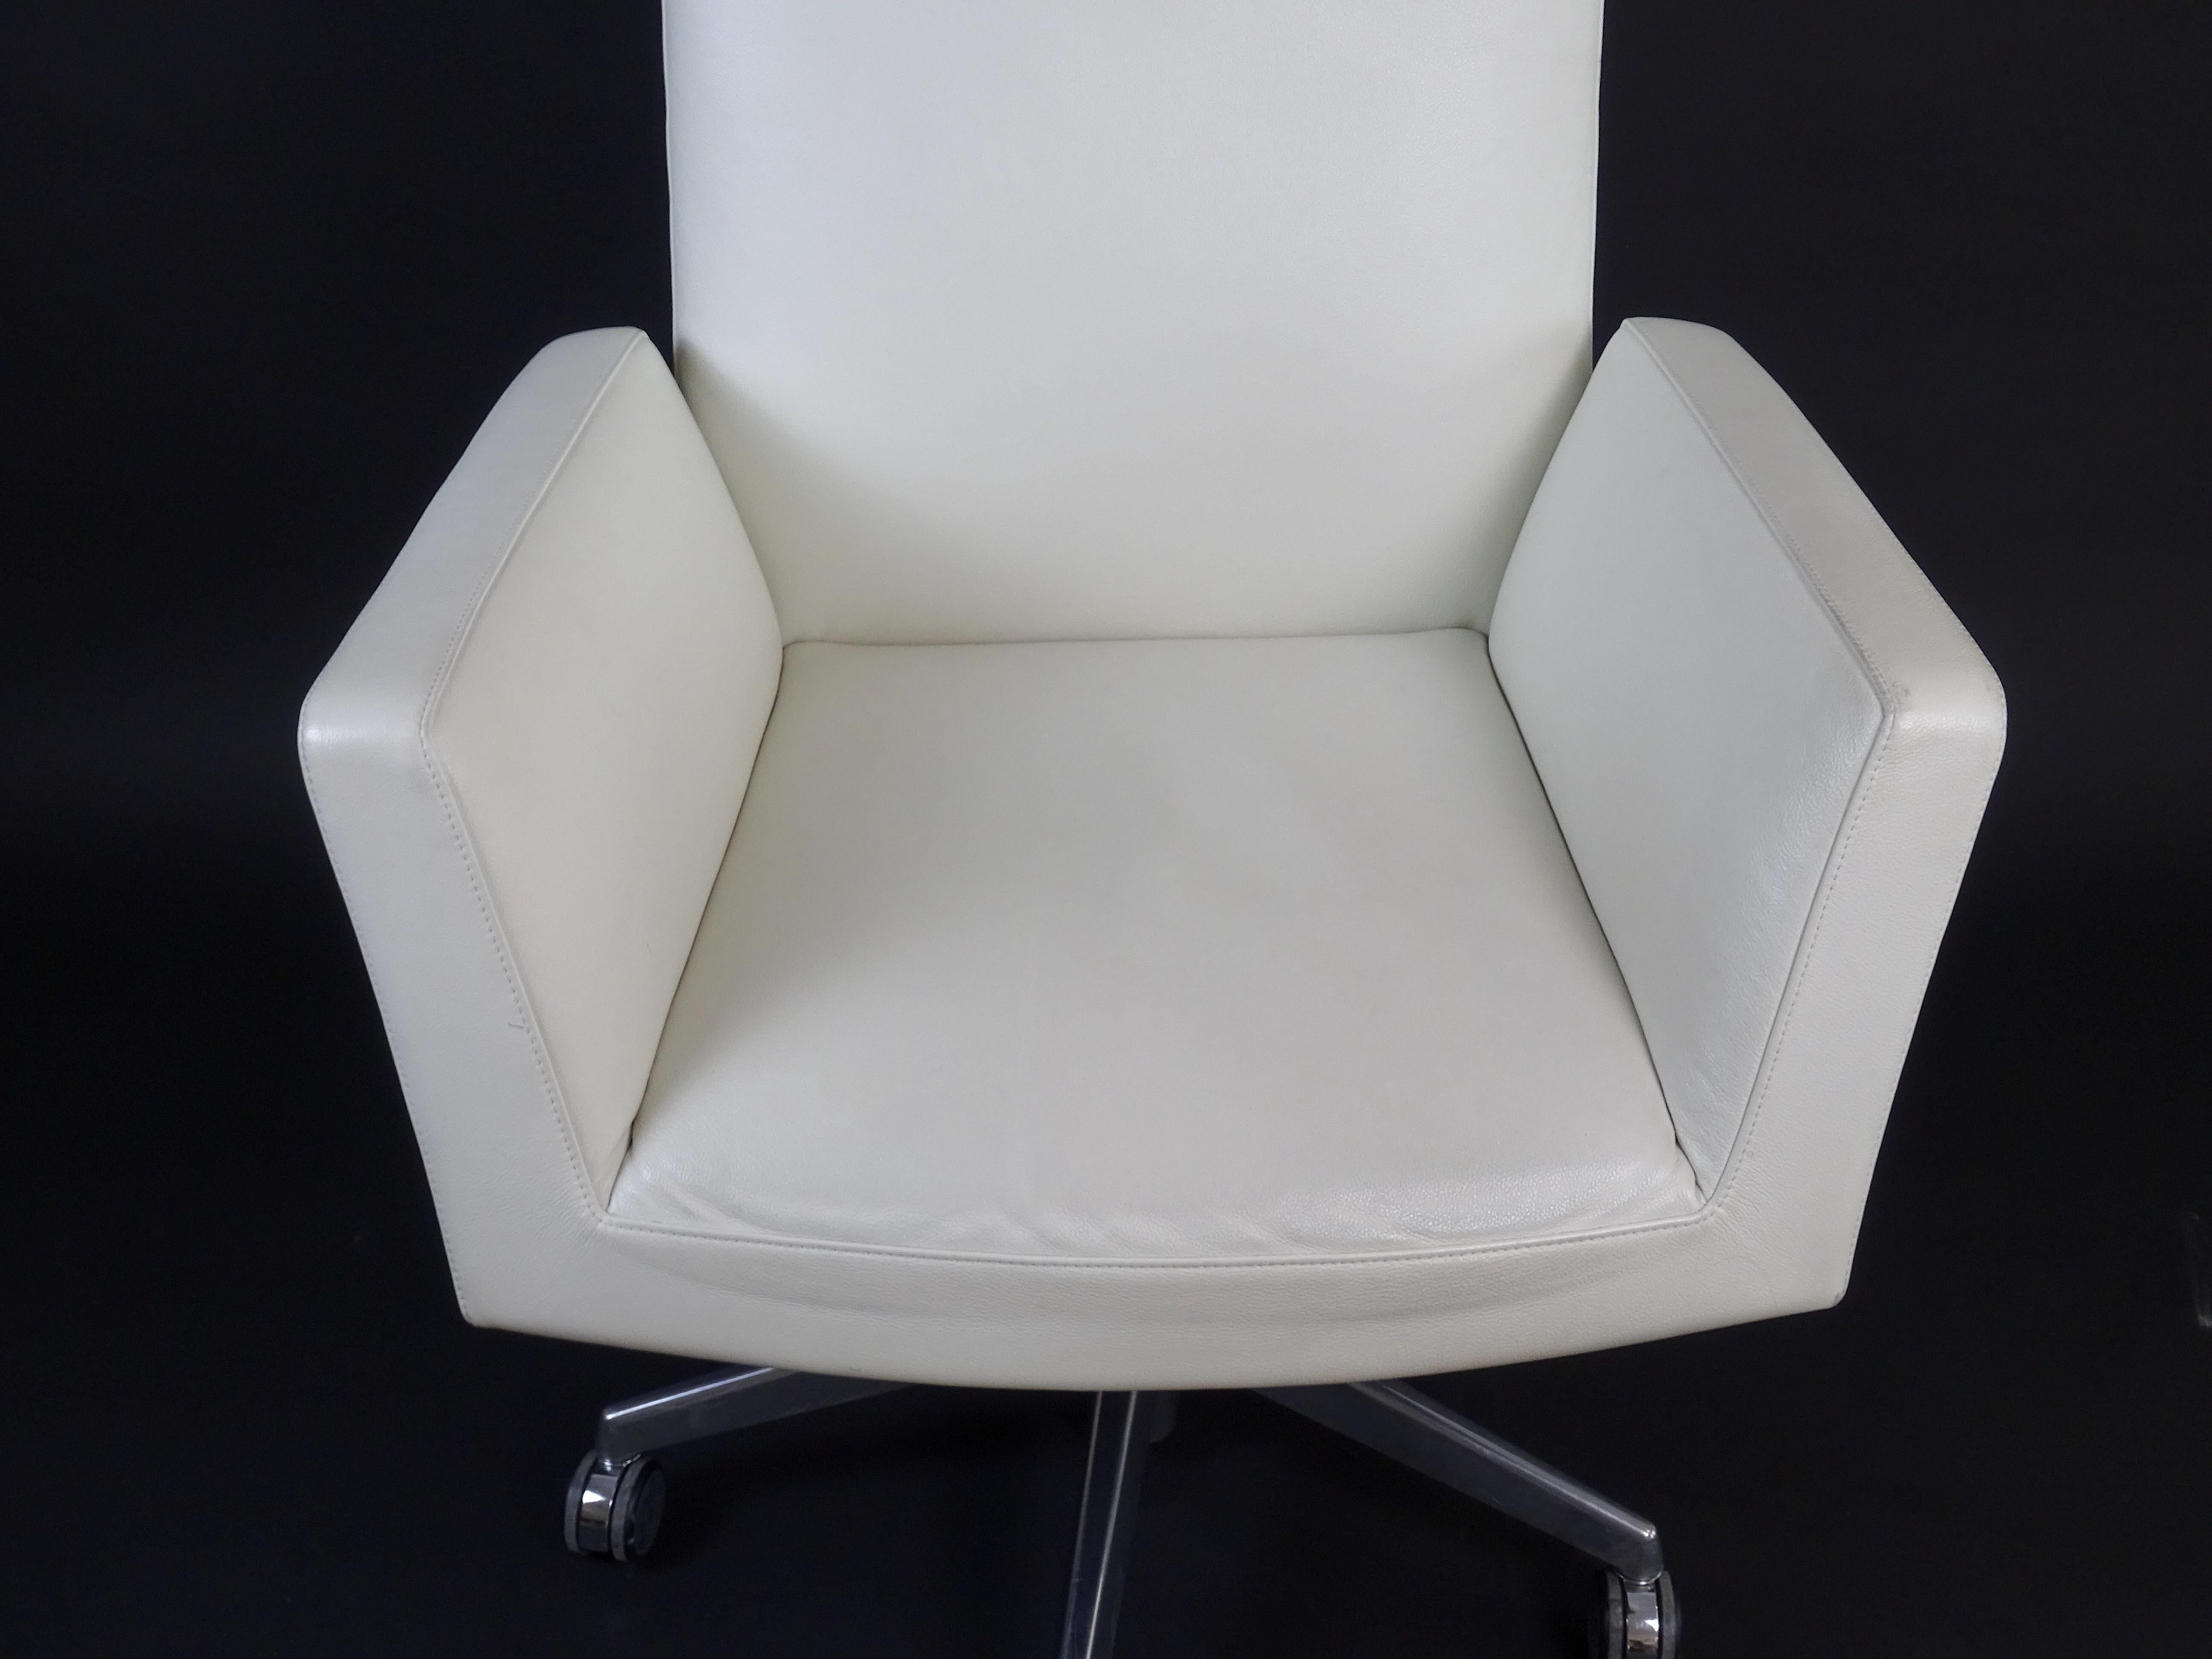 Contemporary Chancellor President Swivel Chair by Livore, Altherr & Modina for Poltrona Frau